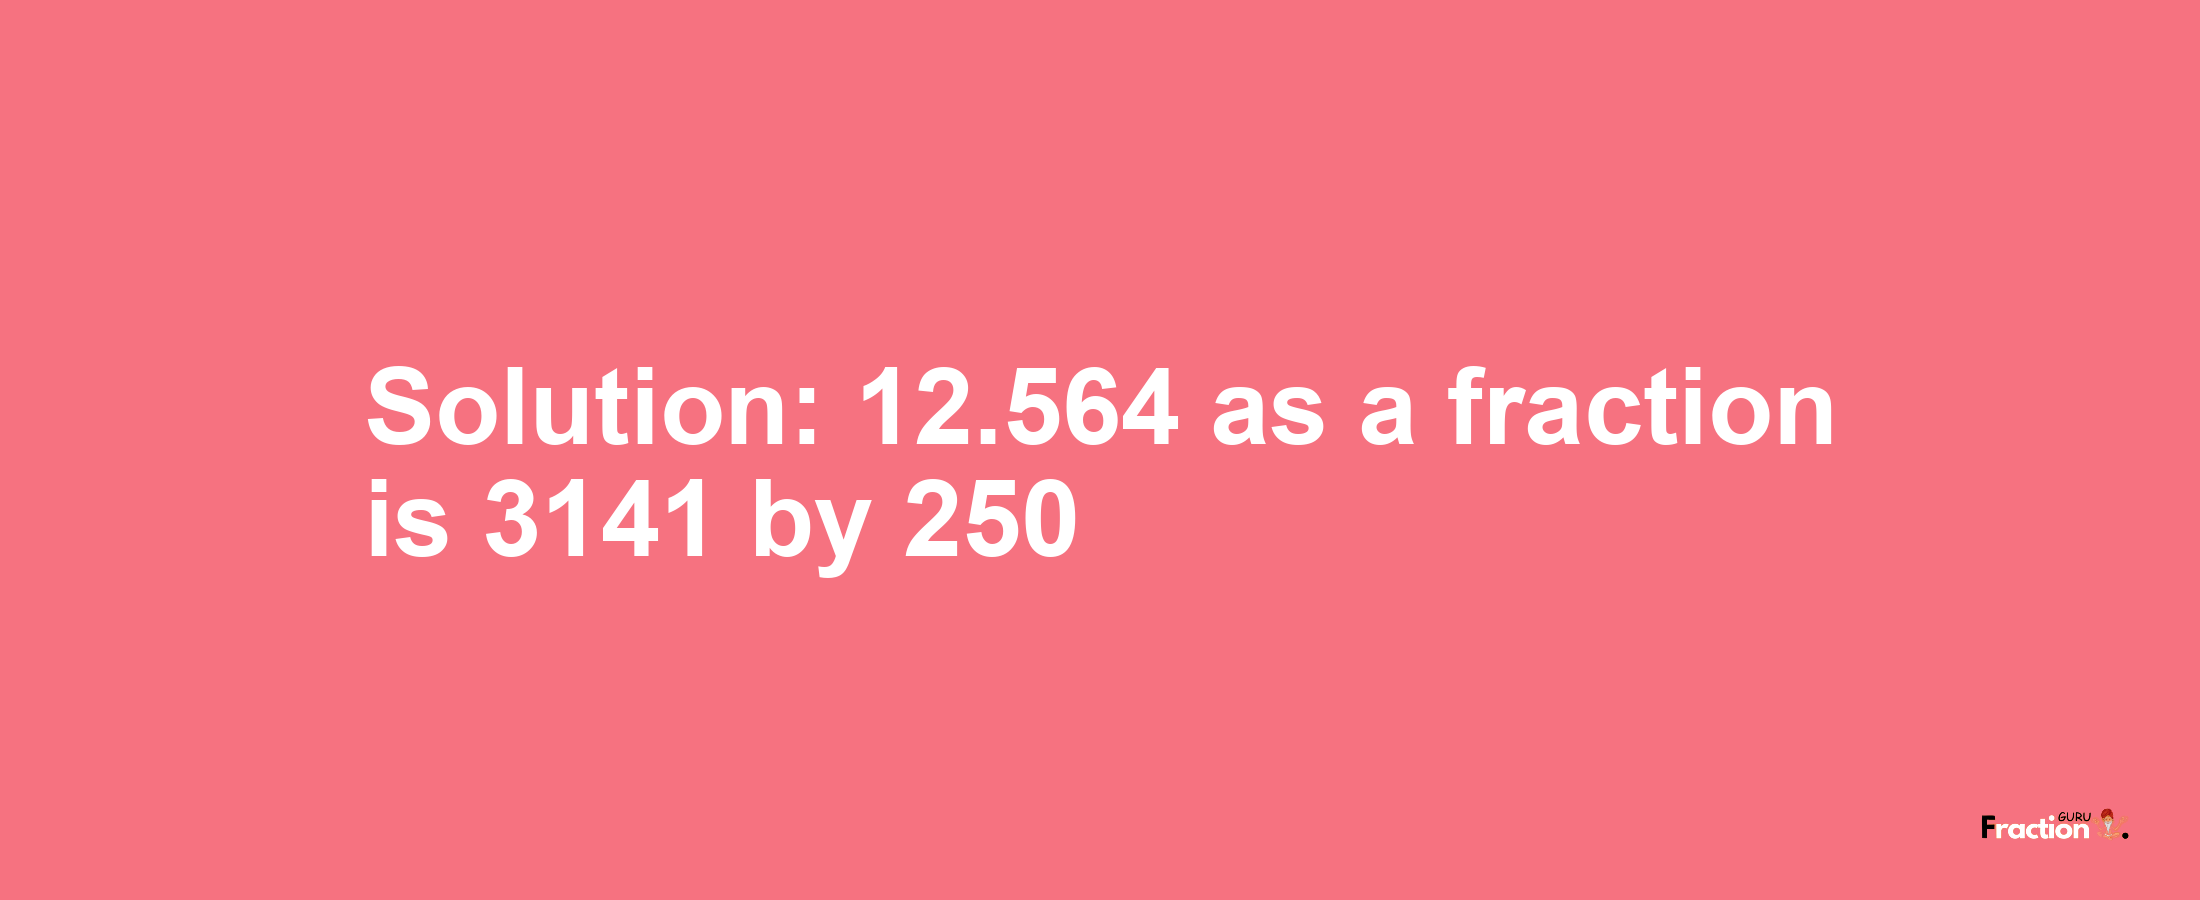 Solution:12.564 as a fraction is 3141/250